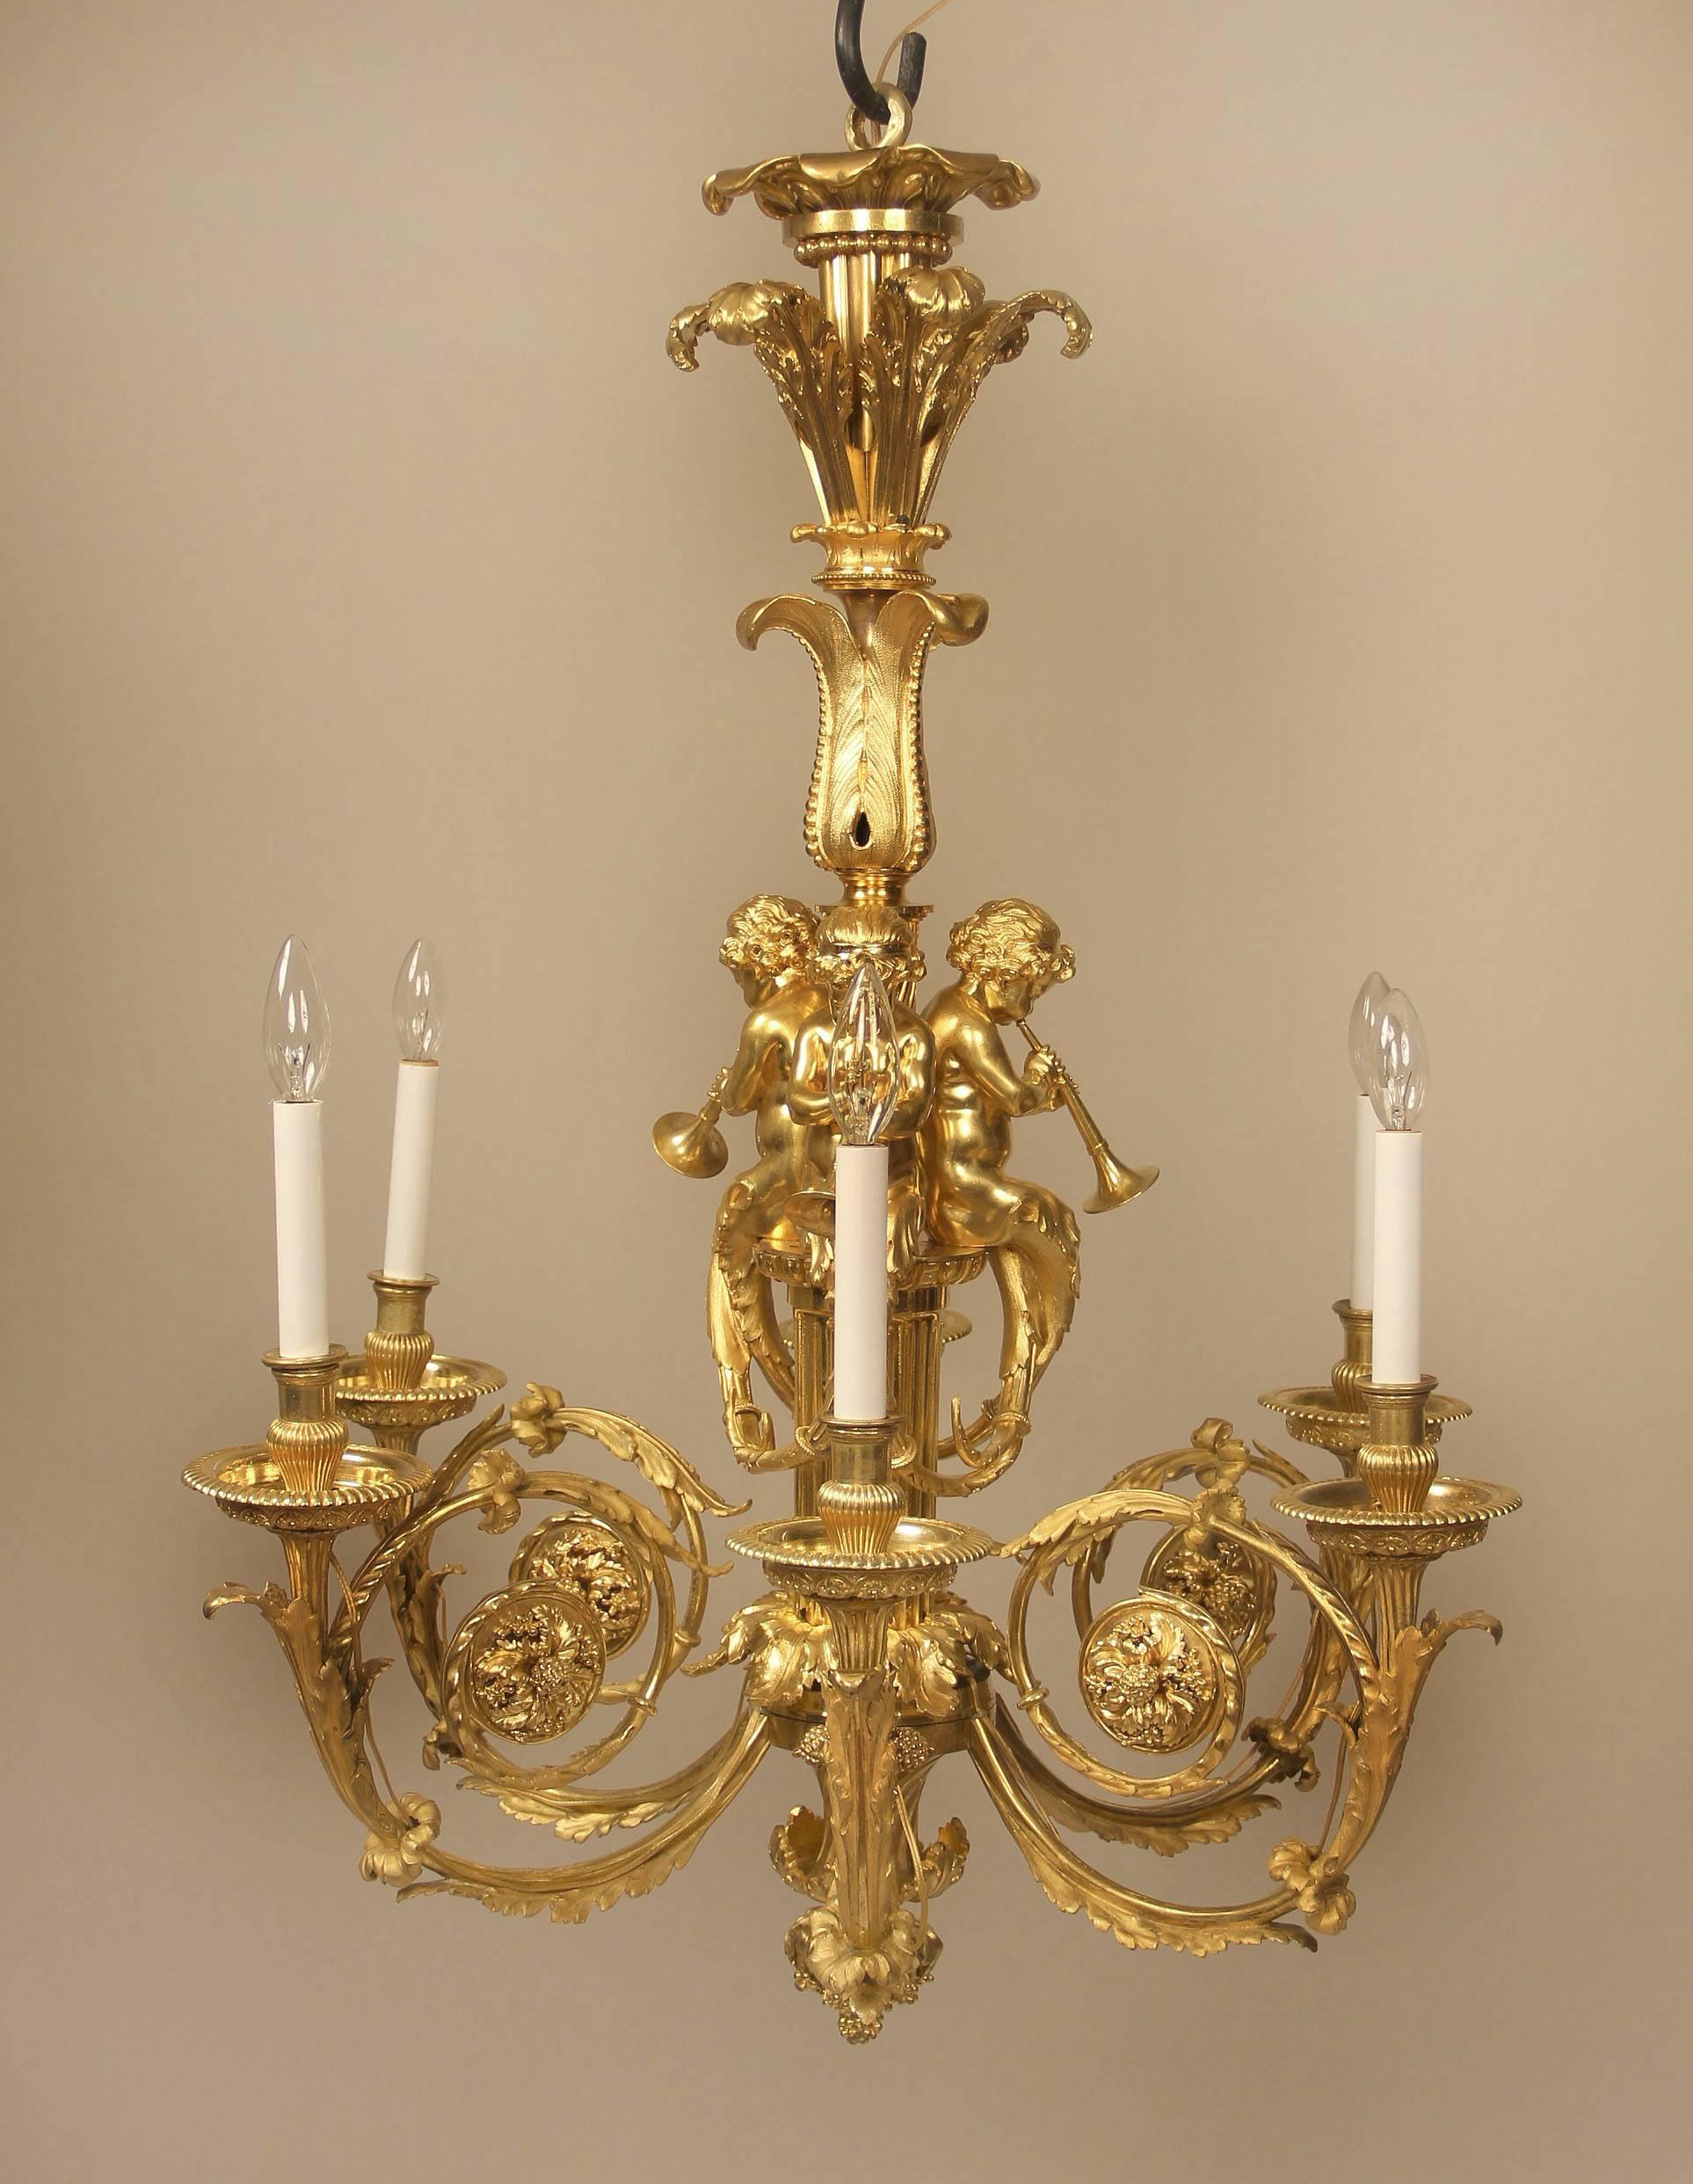 An exceptional late 19th century gilt bronze six-light chandelier

By Henry Dasson

With three large bronze cherubs playing horns, the neck with plumes, the base and arms with flowers, berries and foliage, six perimeter lights.

Signed Henry